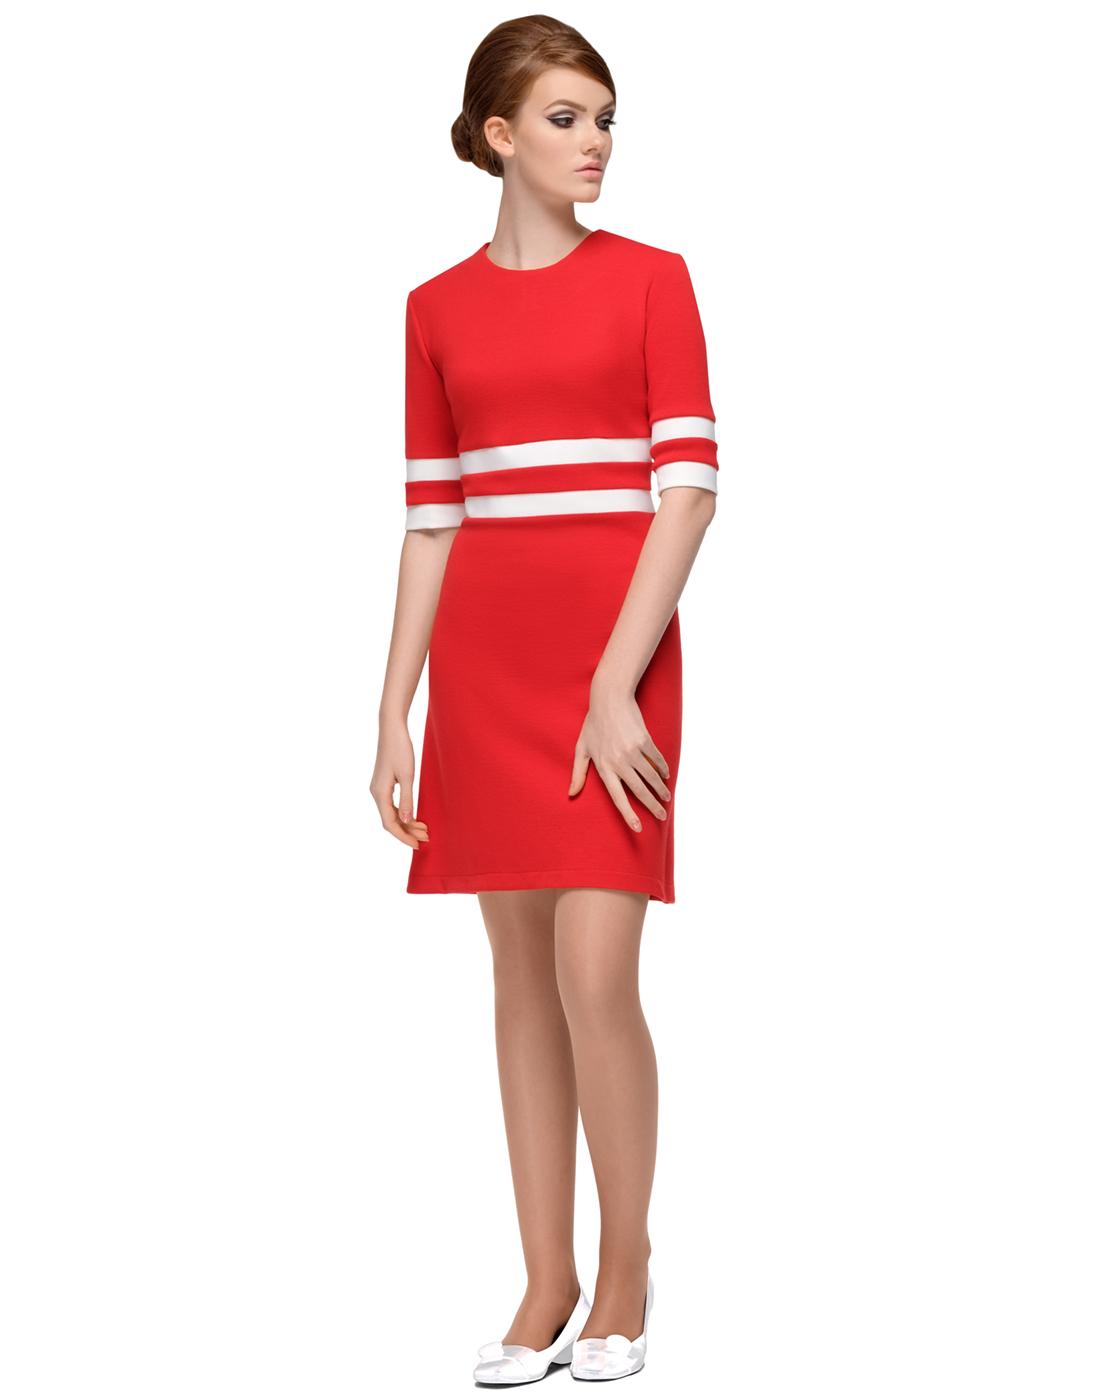 MARMALADE Retro 60s Mod Summer Dress in Red with Stripe